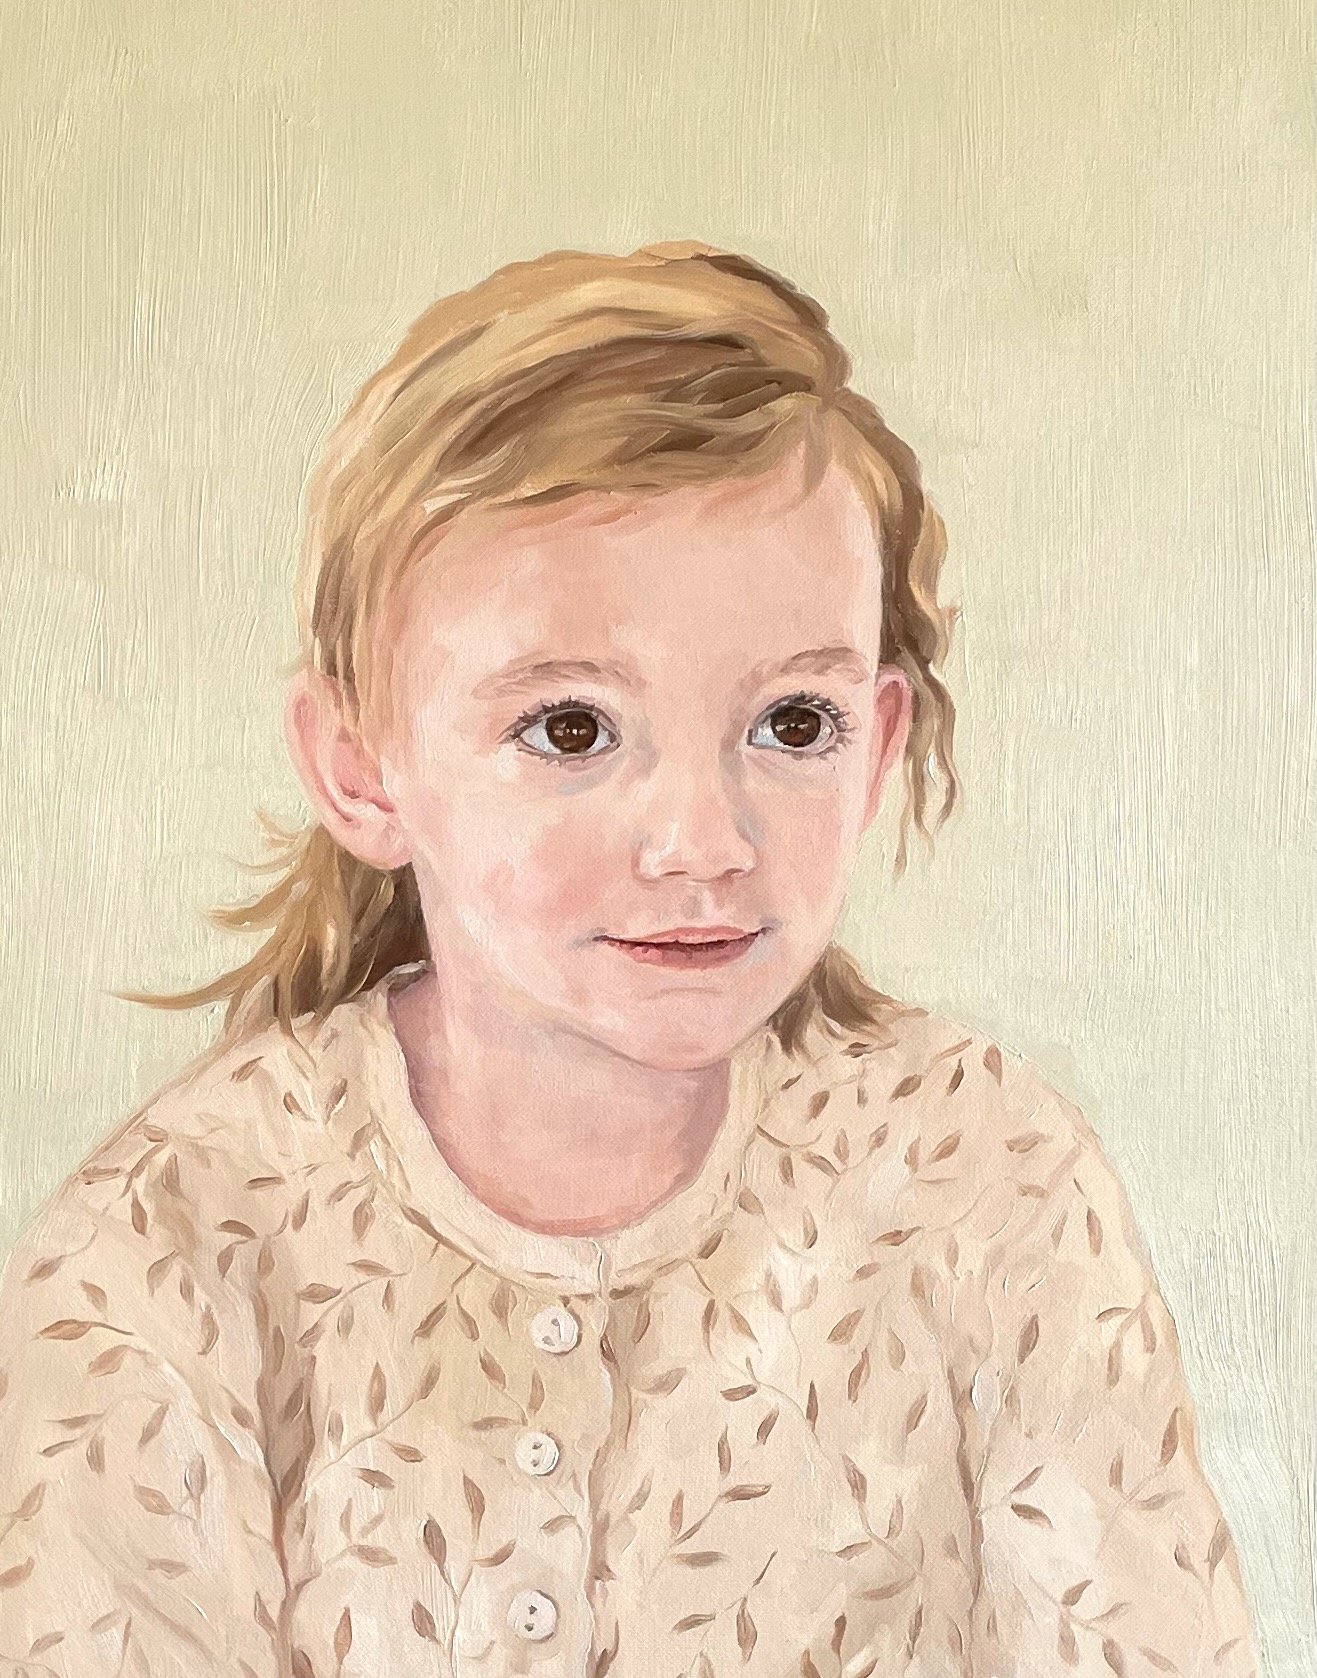 Sadie, 40 x 50cm oil on Fabriano paper